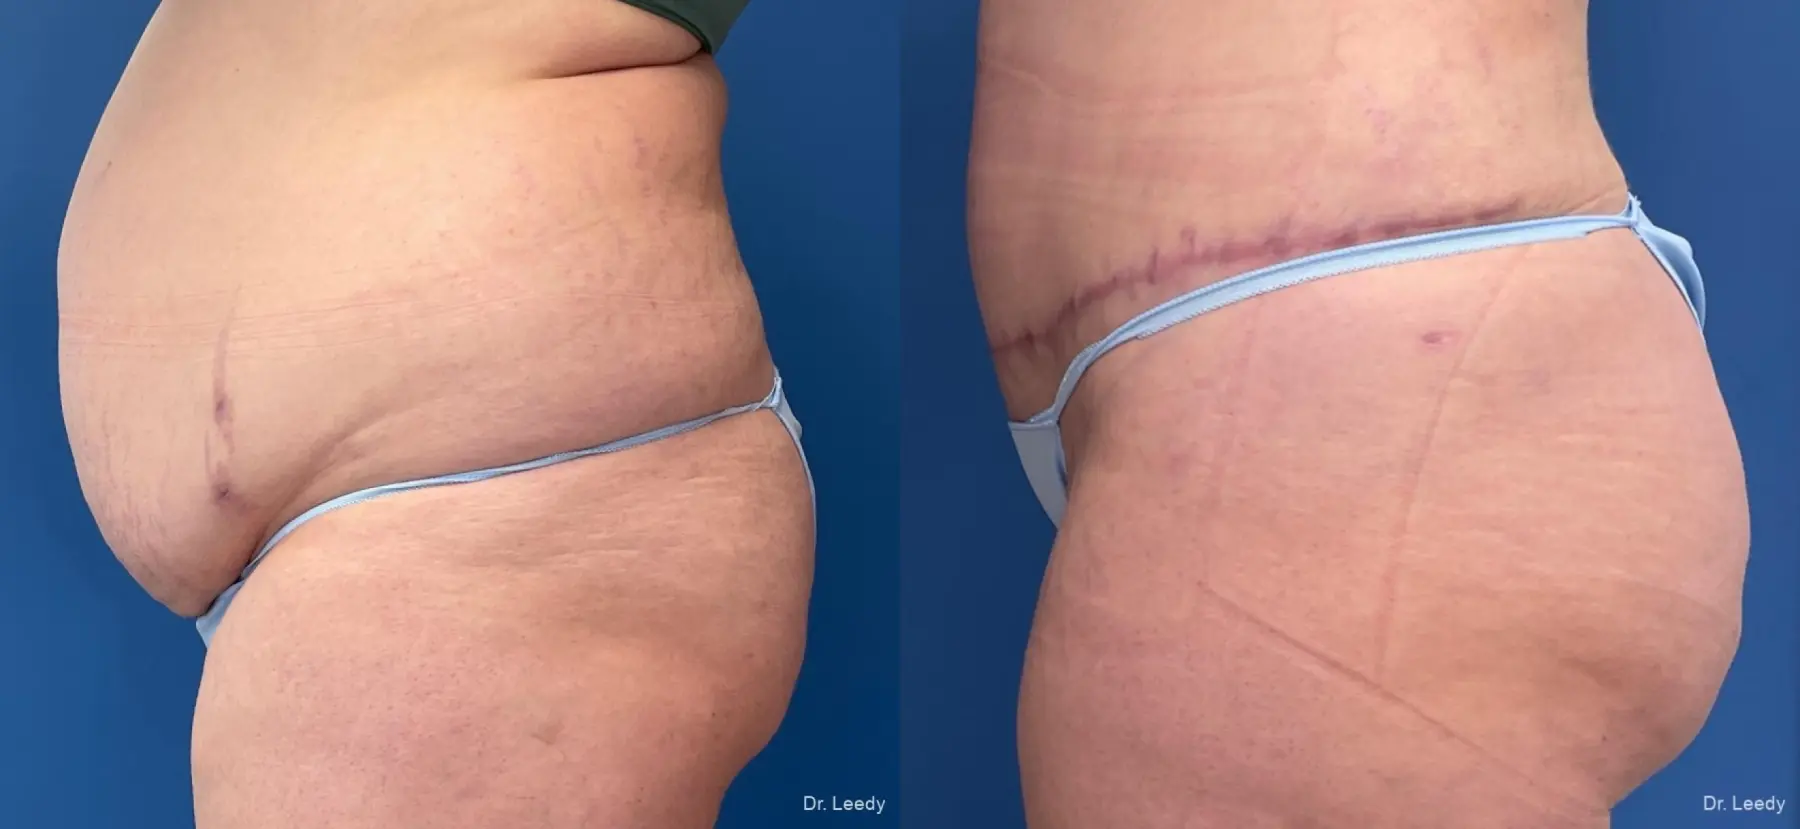 Abdominoplasty With BBL: Patient 8 - Before and After 3